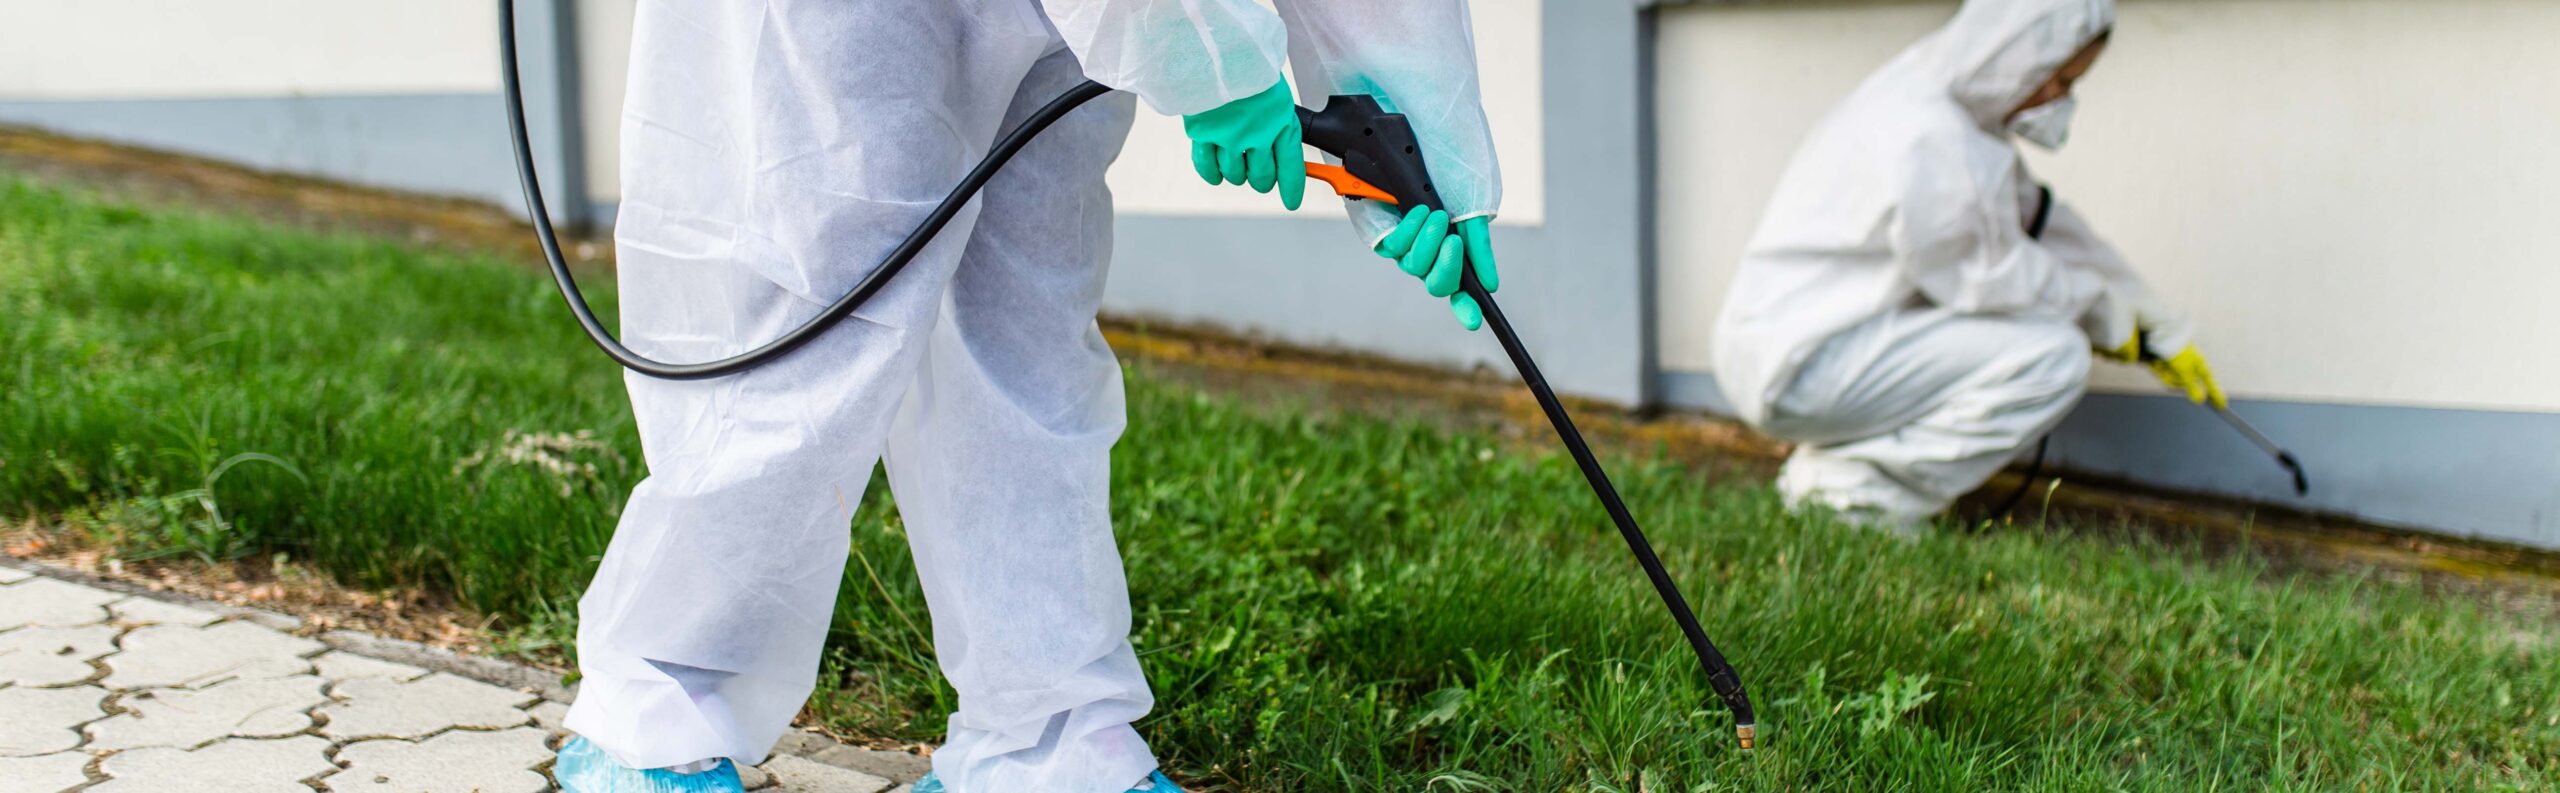 Benefits of mosquito misting systems vs spraying services